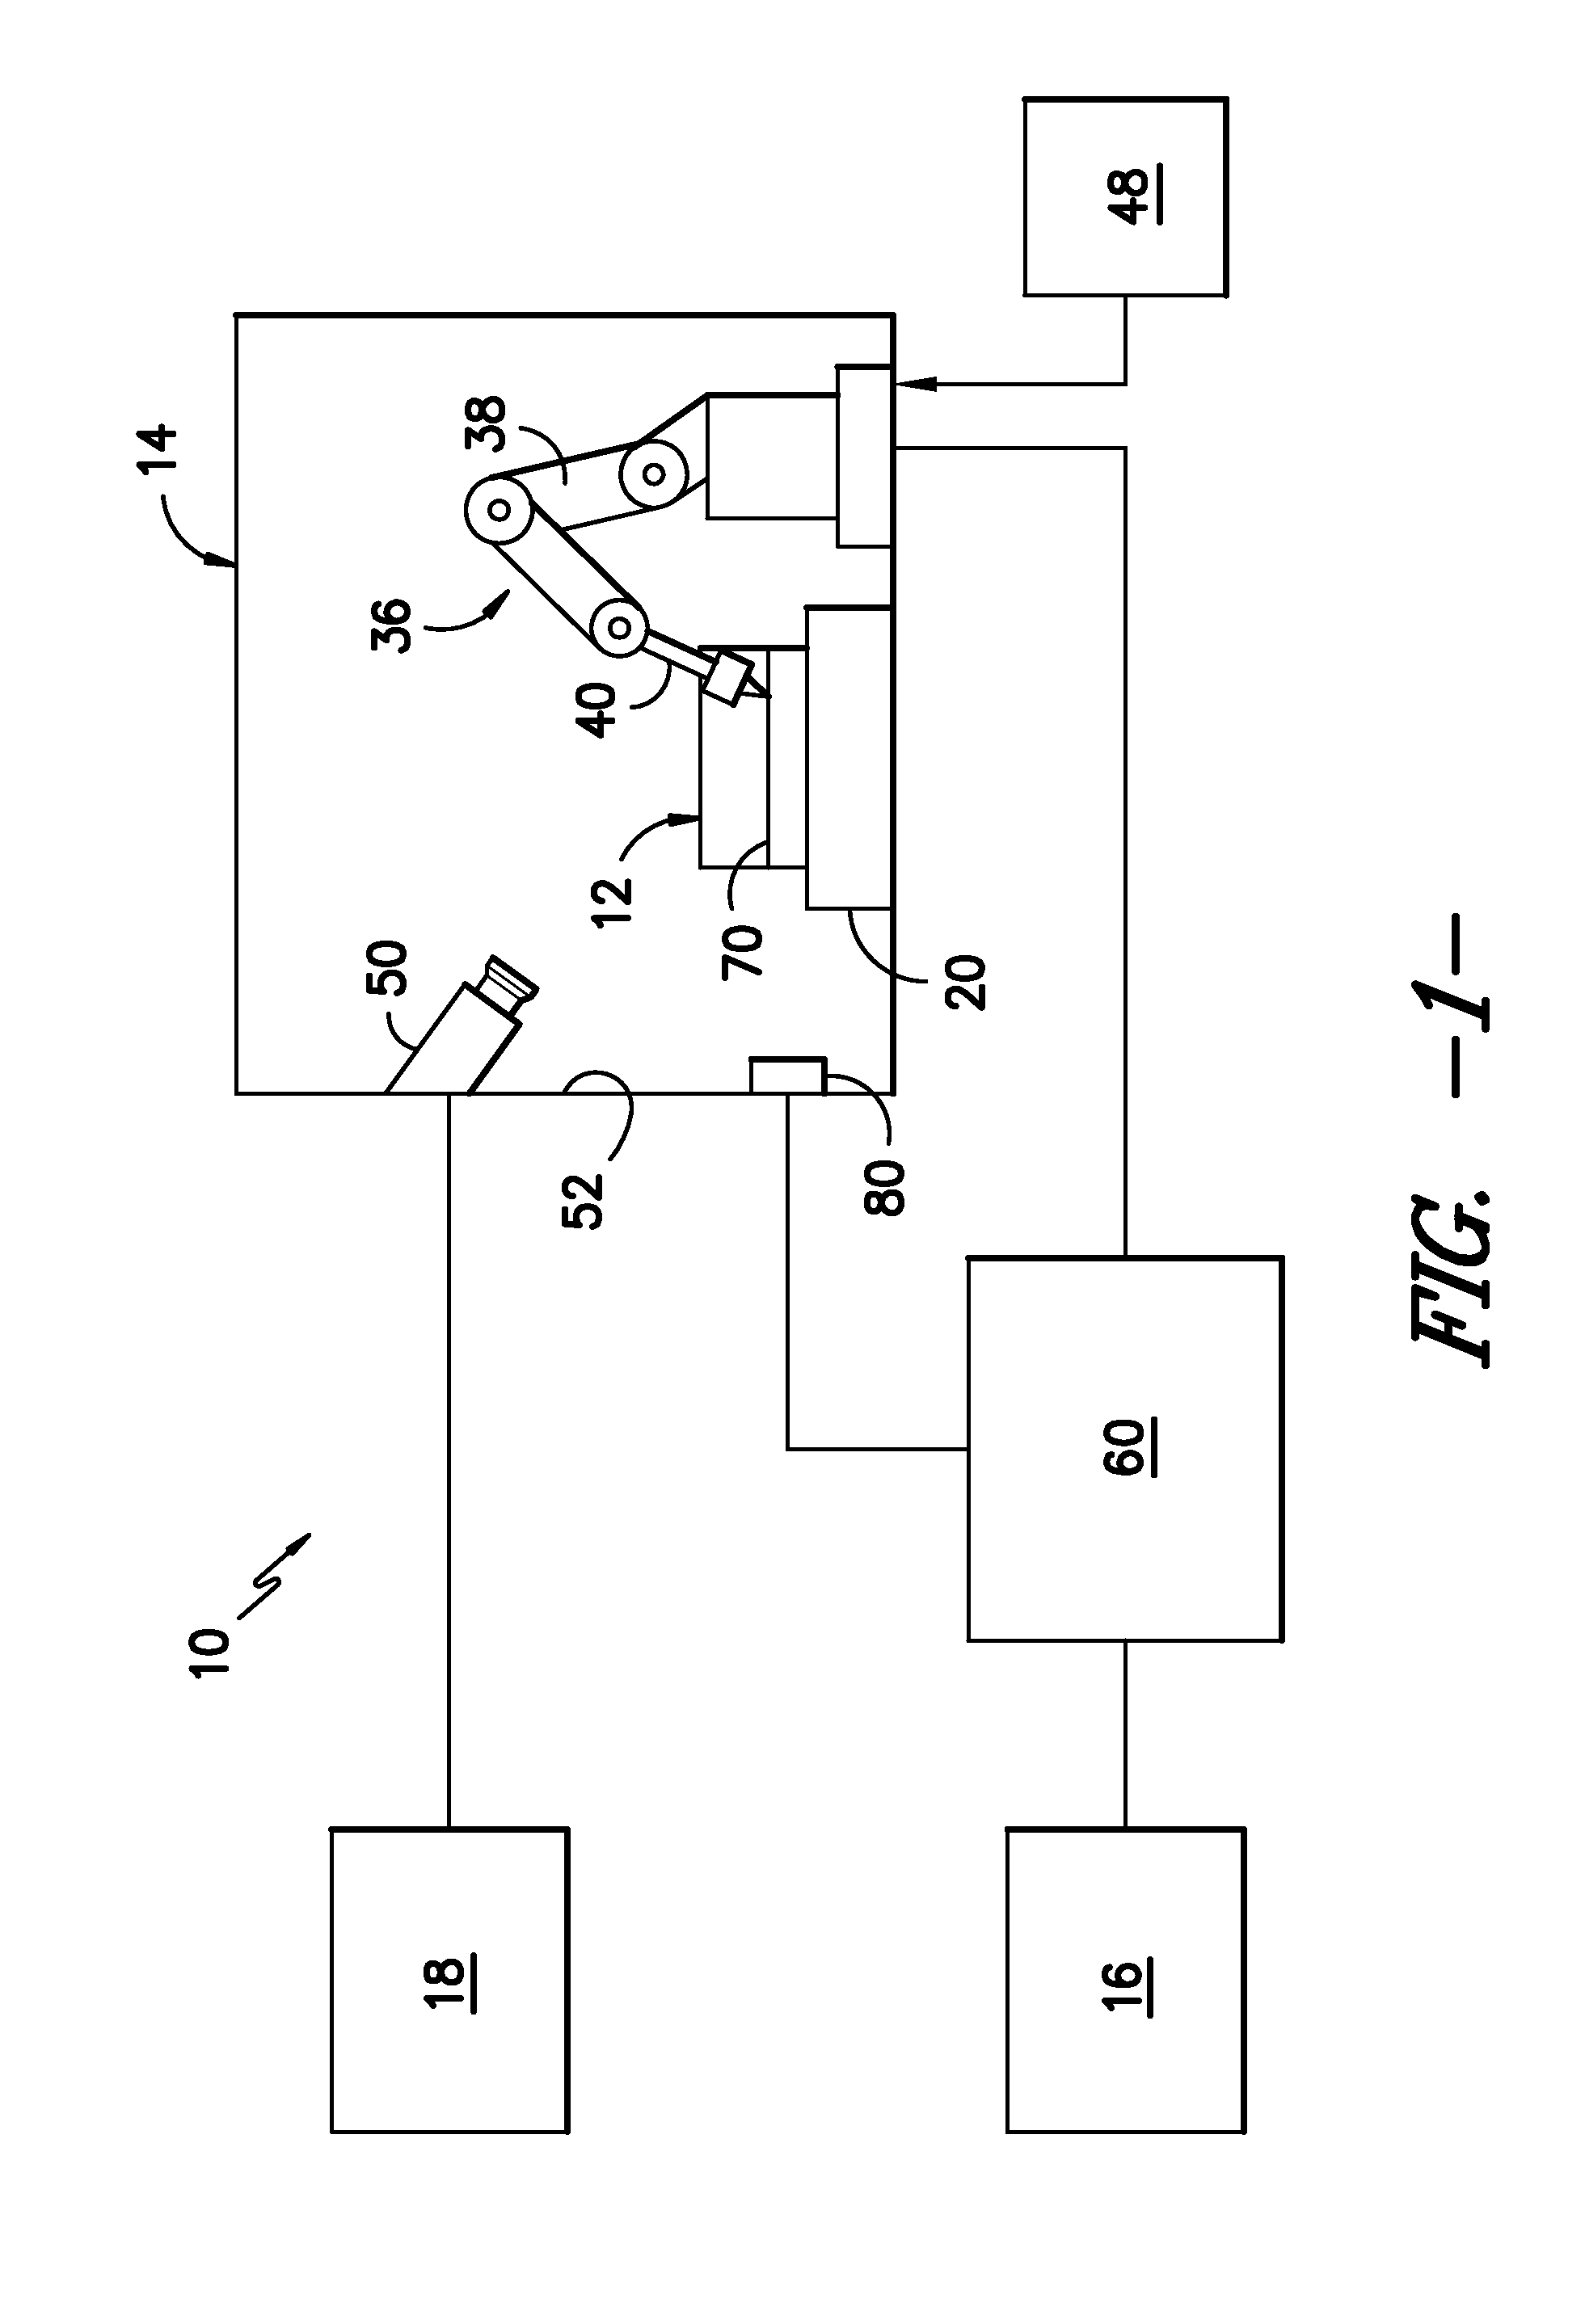 System and method for performing remote welding operations on an apparatus